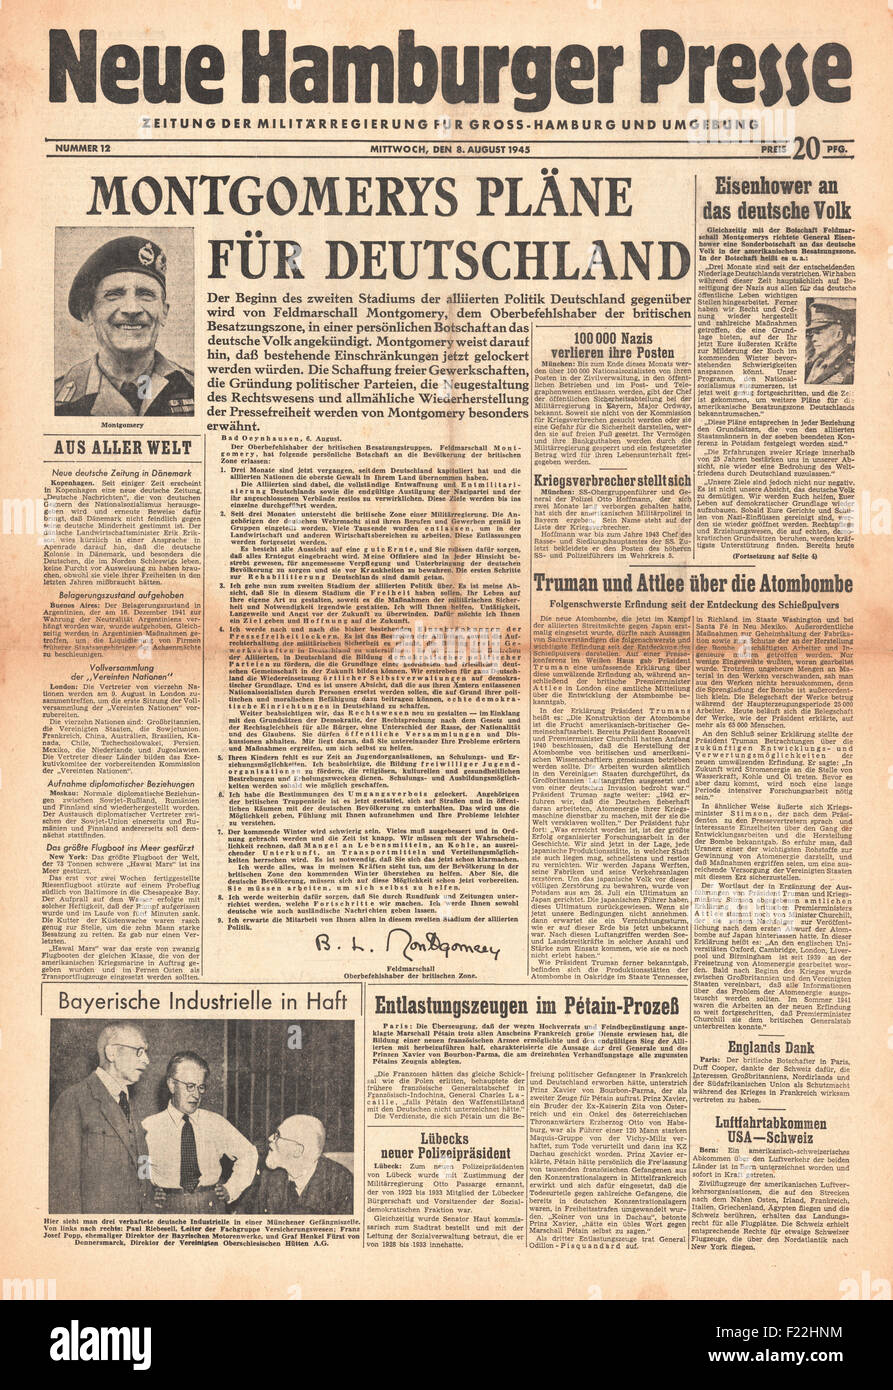 1945 Neue Hamburger Presse front page reporting Field Marshal Montgomery's Plans For Germany and Atom Bomb Dropped On Hiroshima Stock Photo